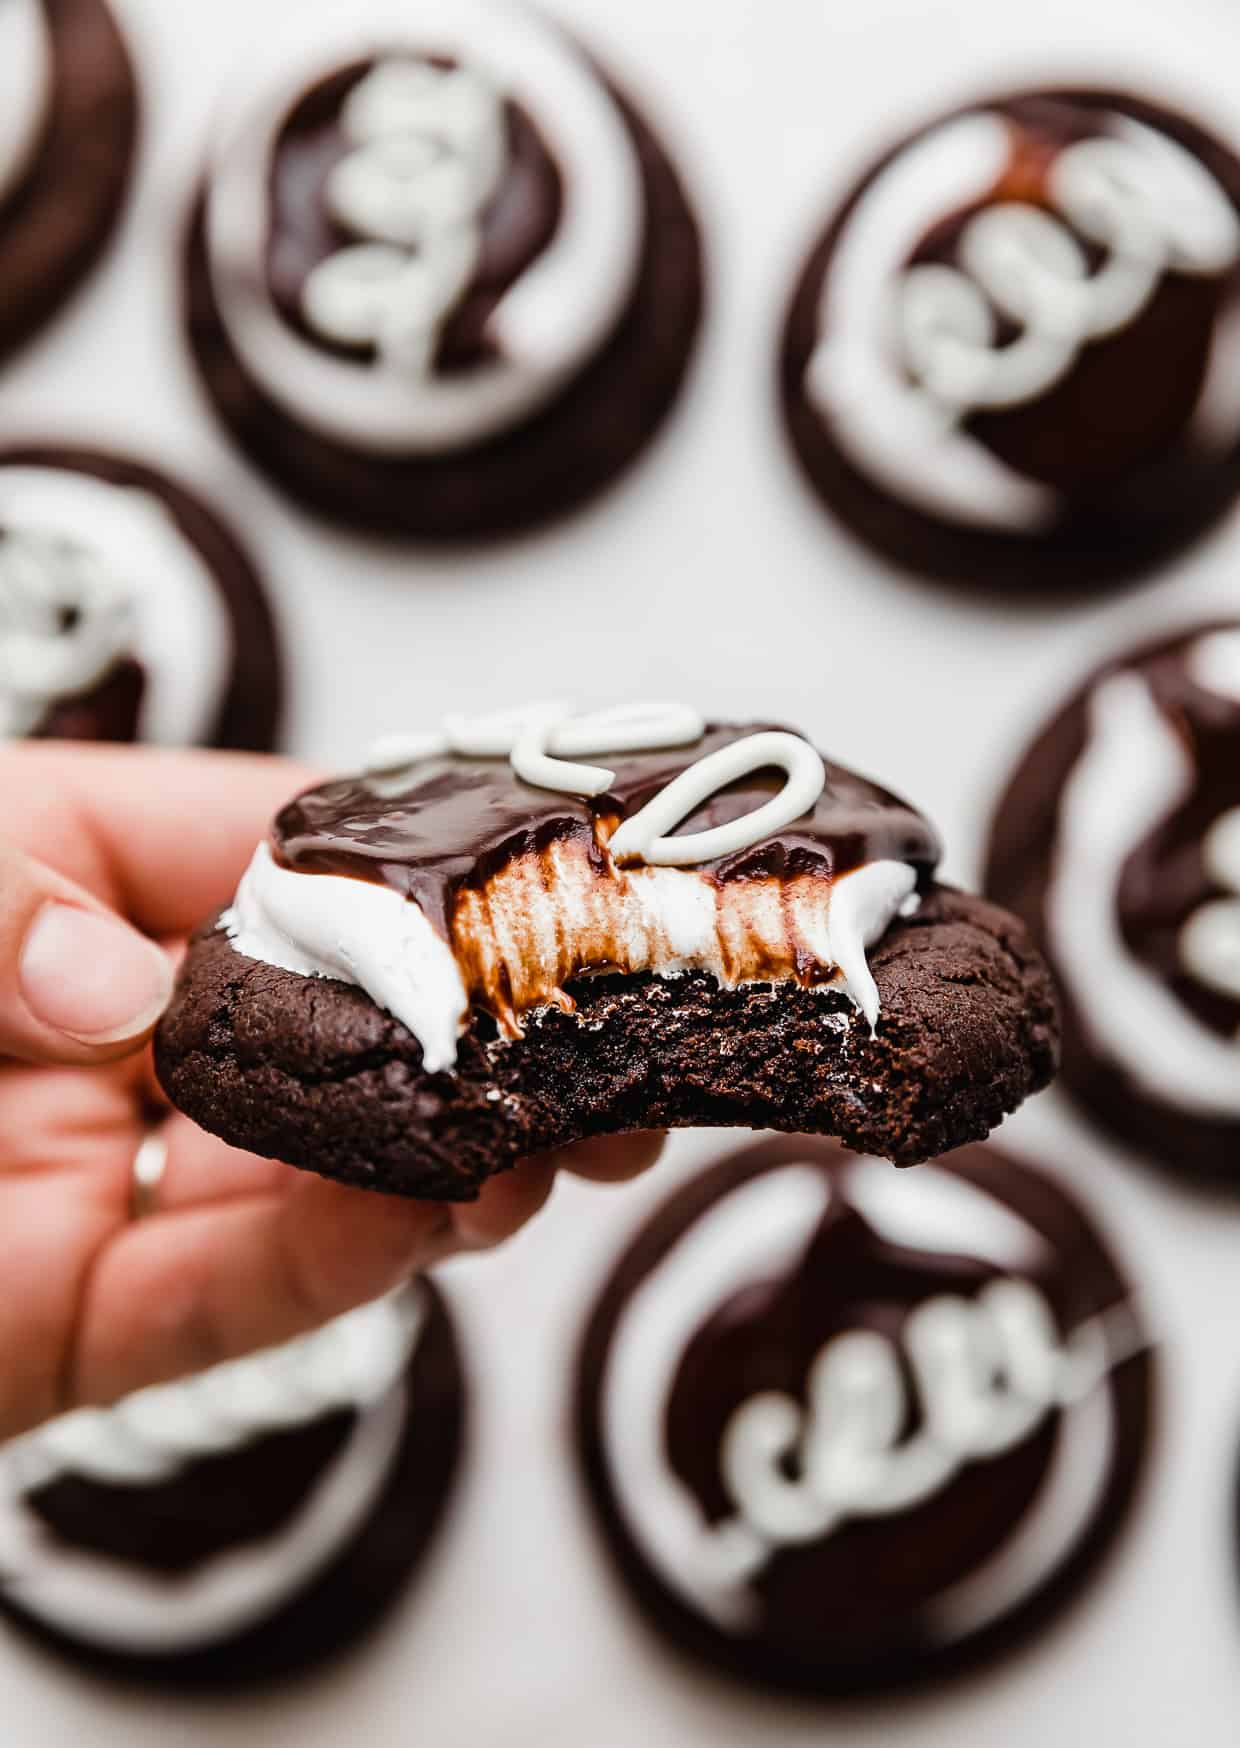 A hand holding a Hostess Cupcake Cookie (chocolate cookie topped with marshmallow frosting and chocolate ganache) with a bite taken out of it.